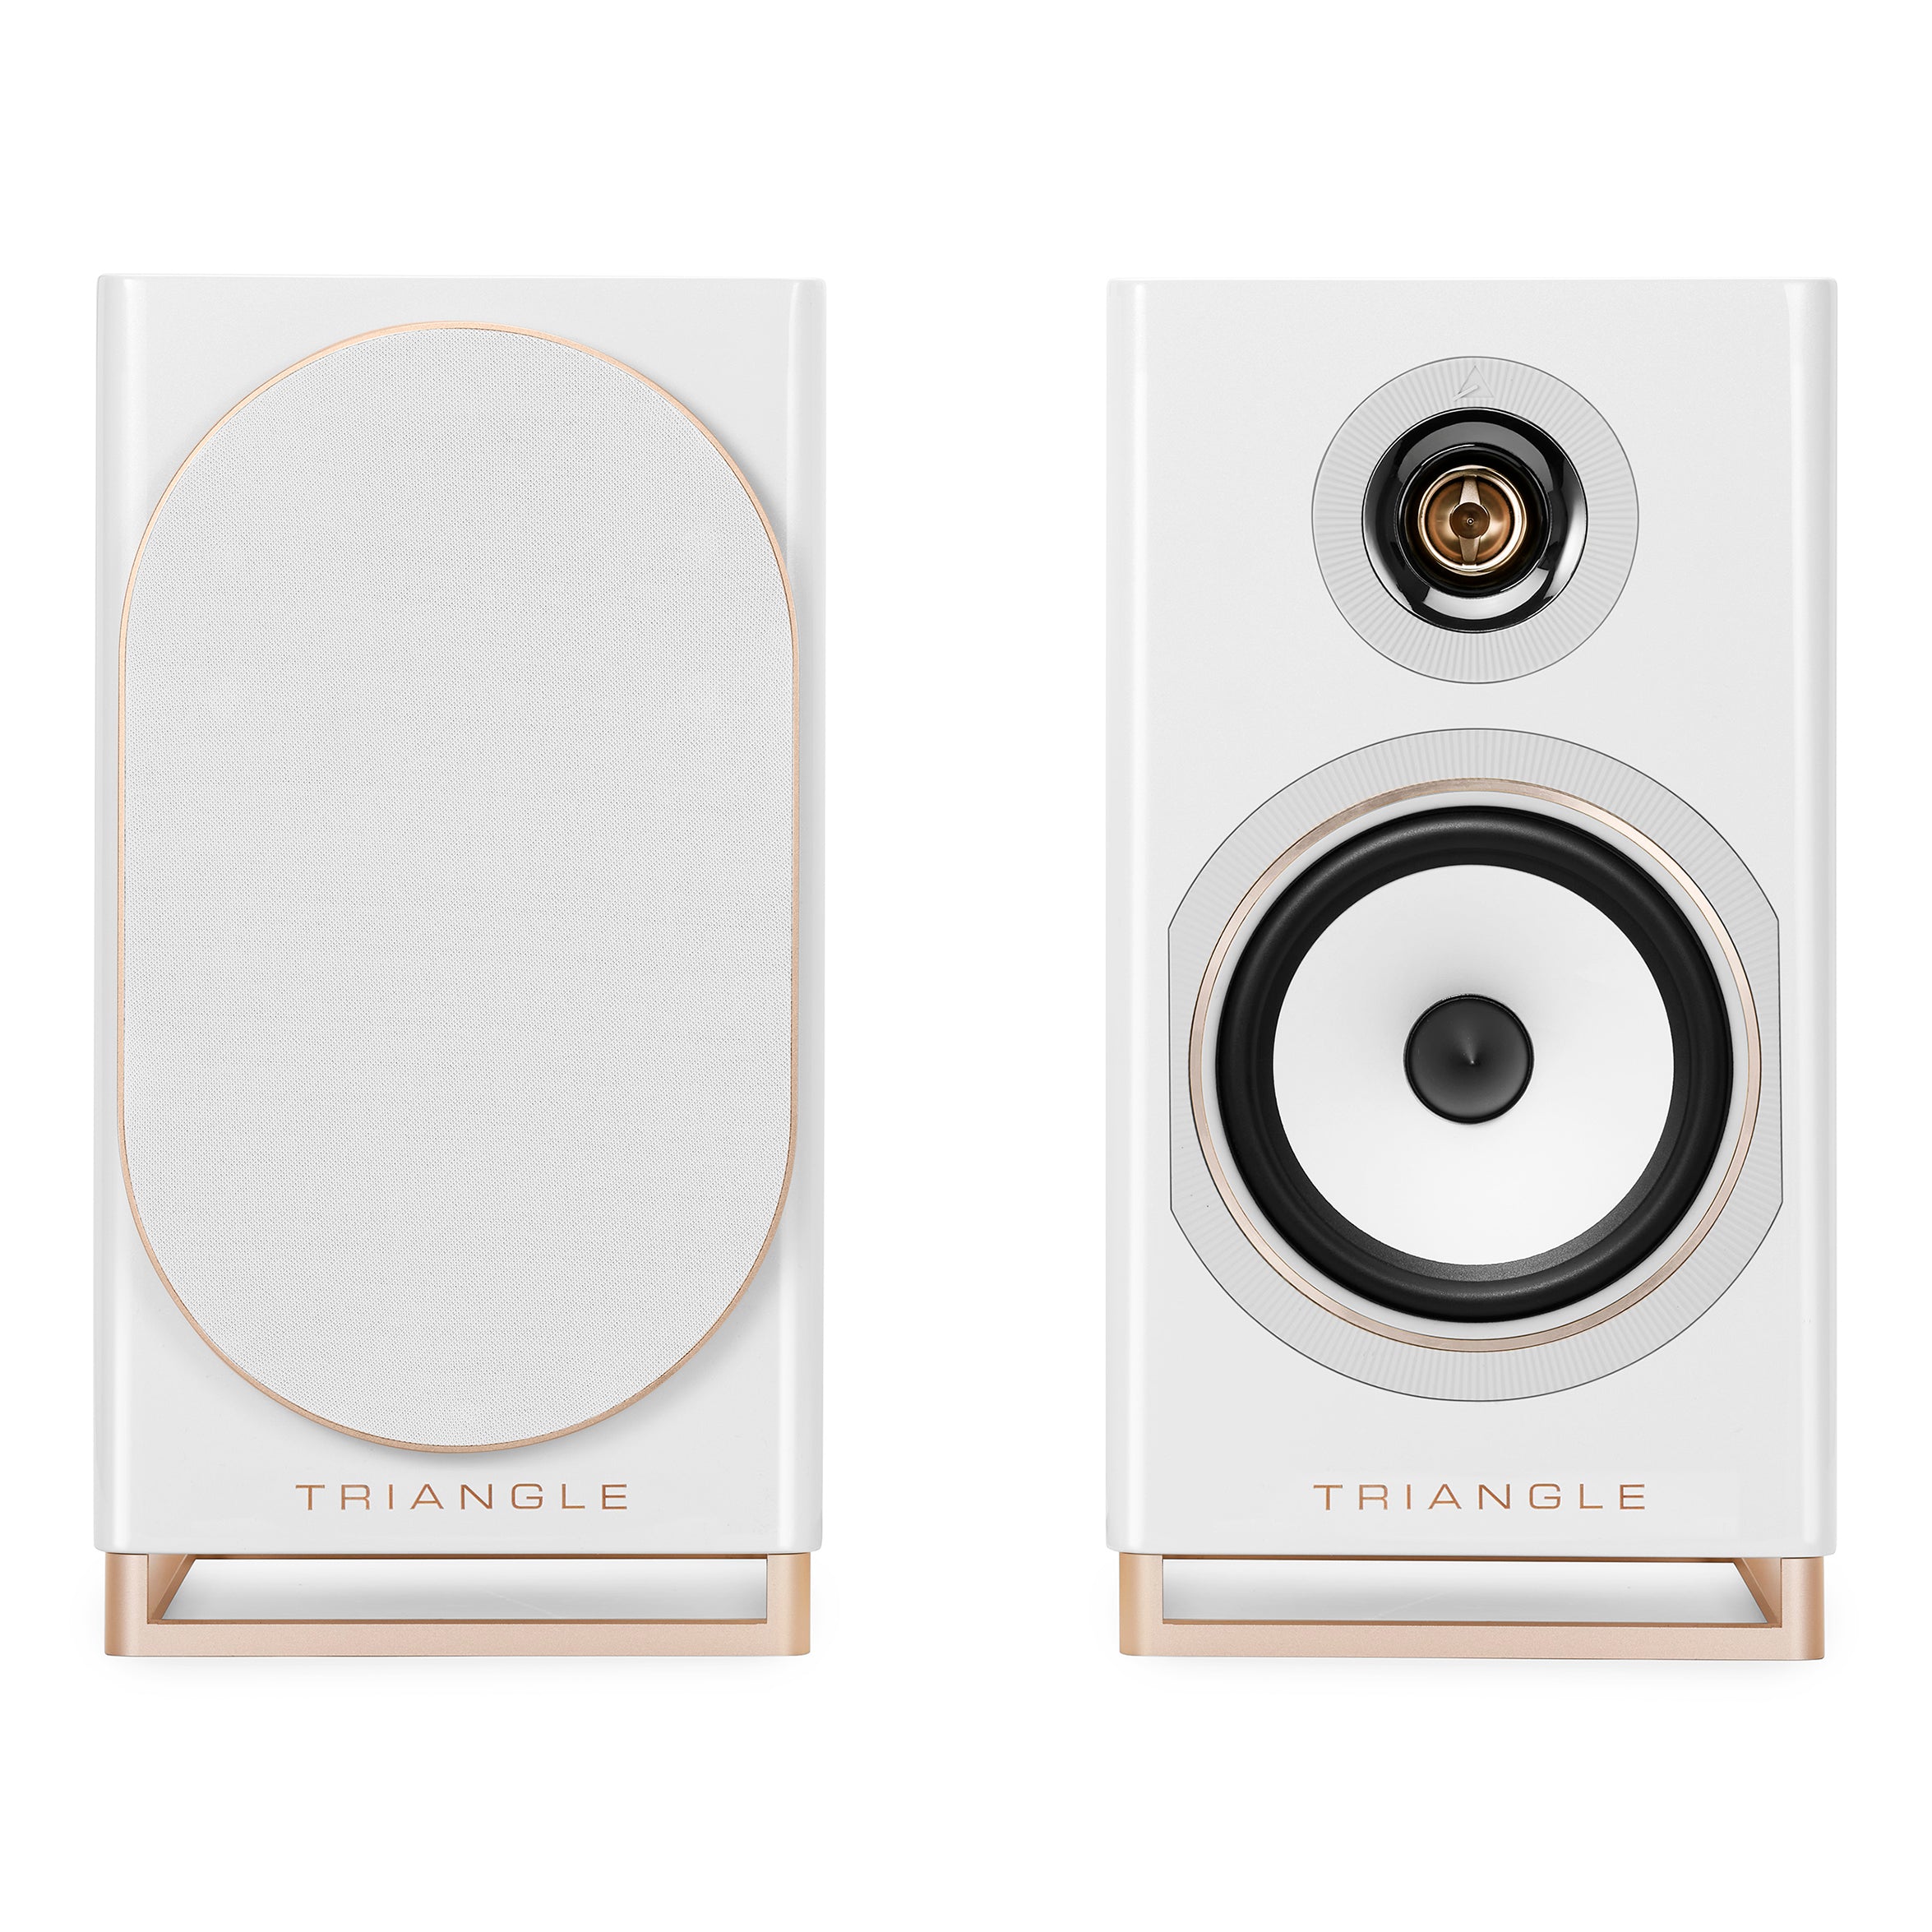 triangle-capella-enceinte-active-wifi-bluetooth-haut-de-gamme-stereo-hub-wisa-streaming-musique-pictures-packshot-blanc-sideral-space-white-3